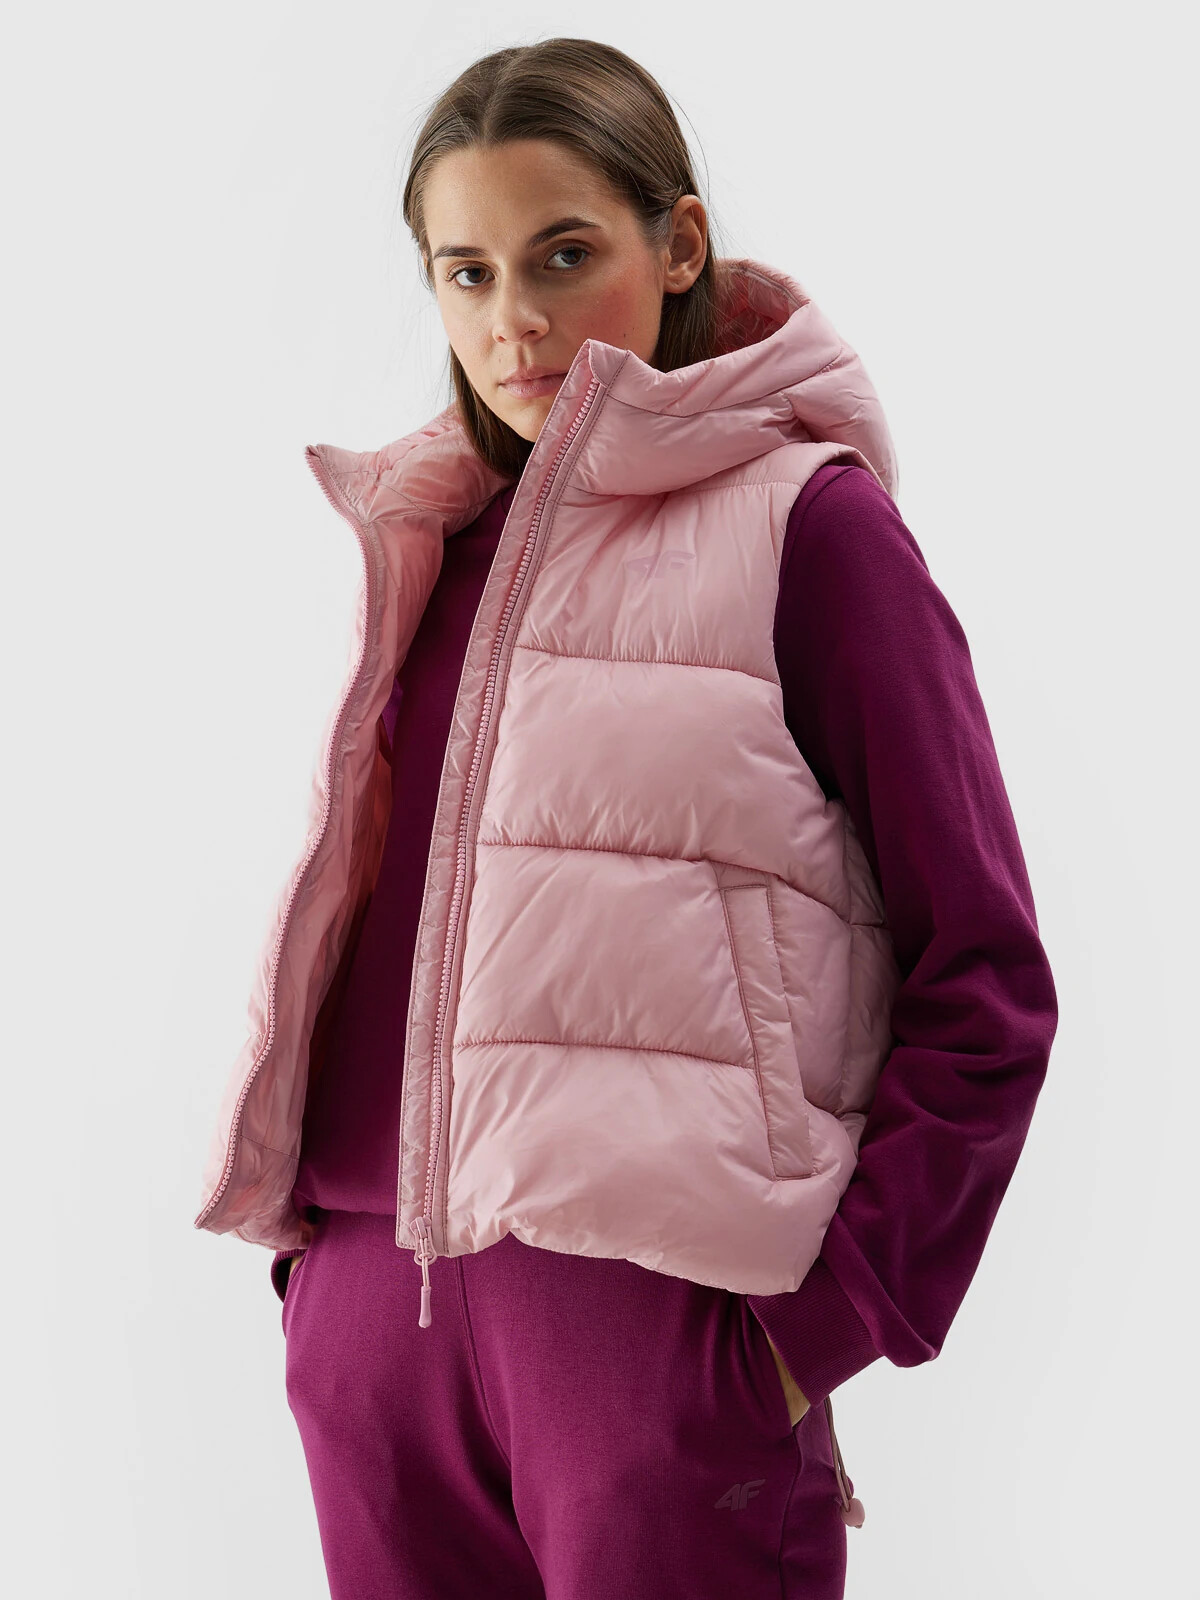 Women's 4F Synthetic Down Down Vest - Pink